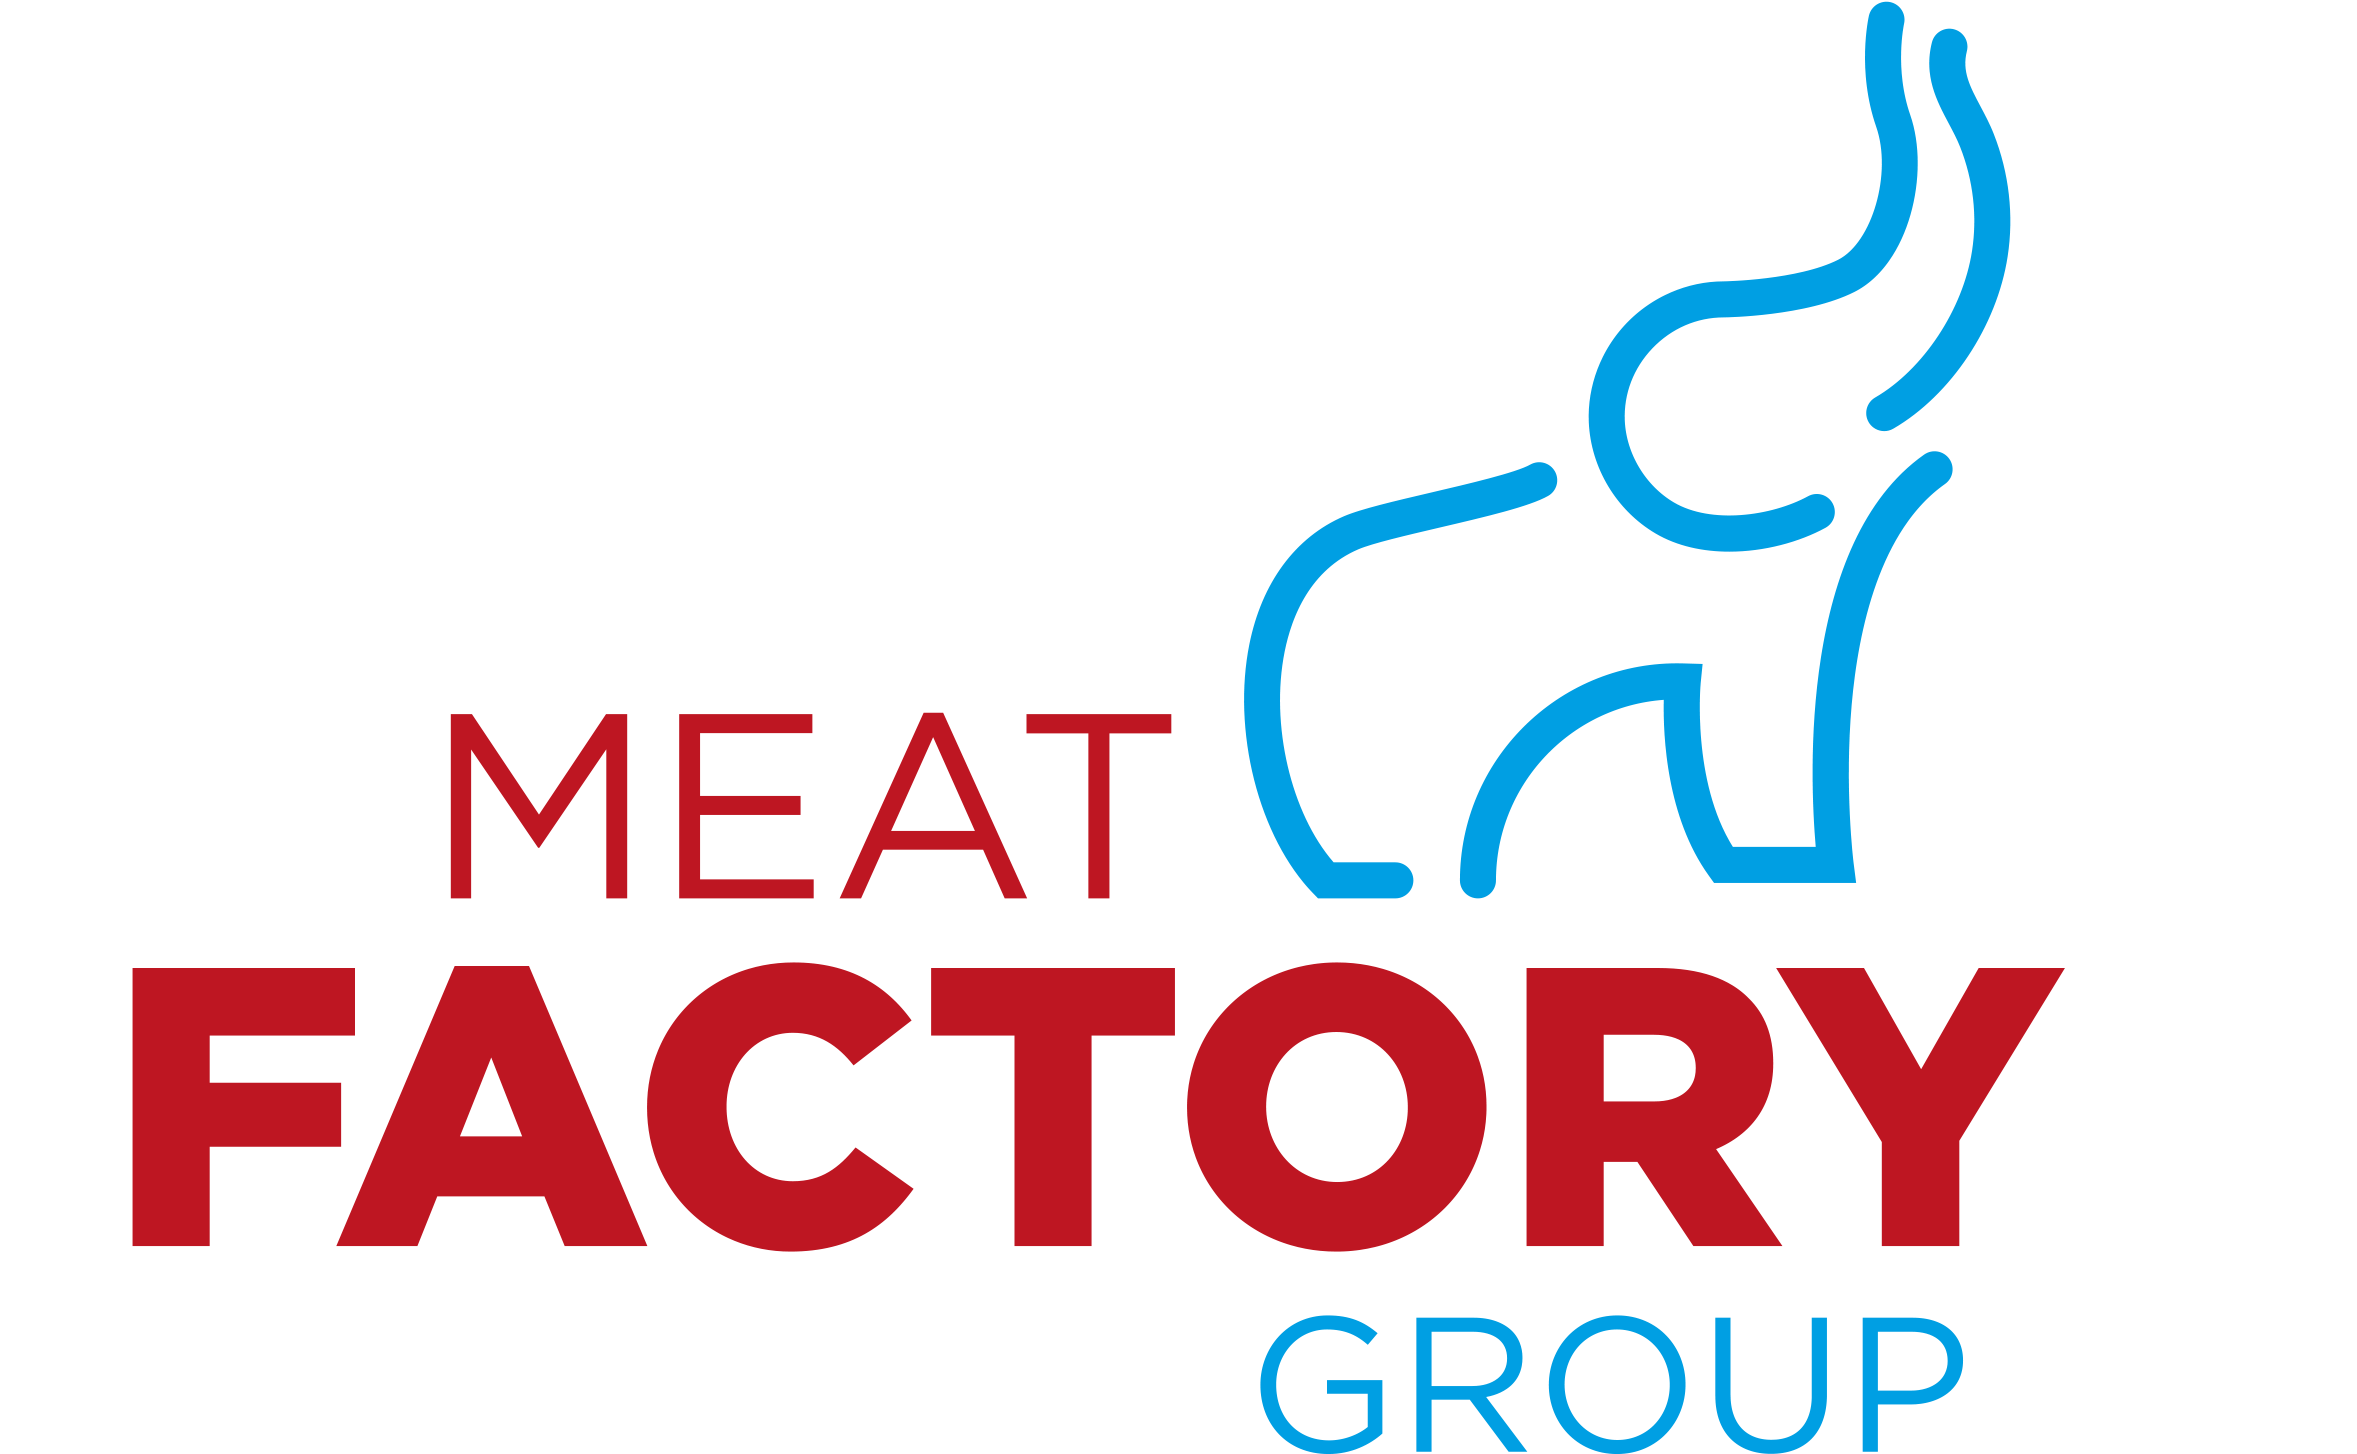 Inicio - meat factory group